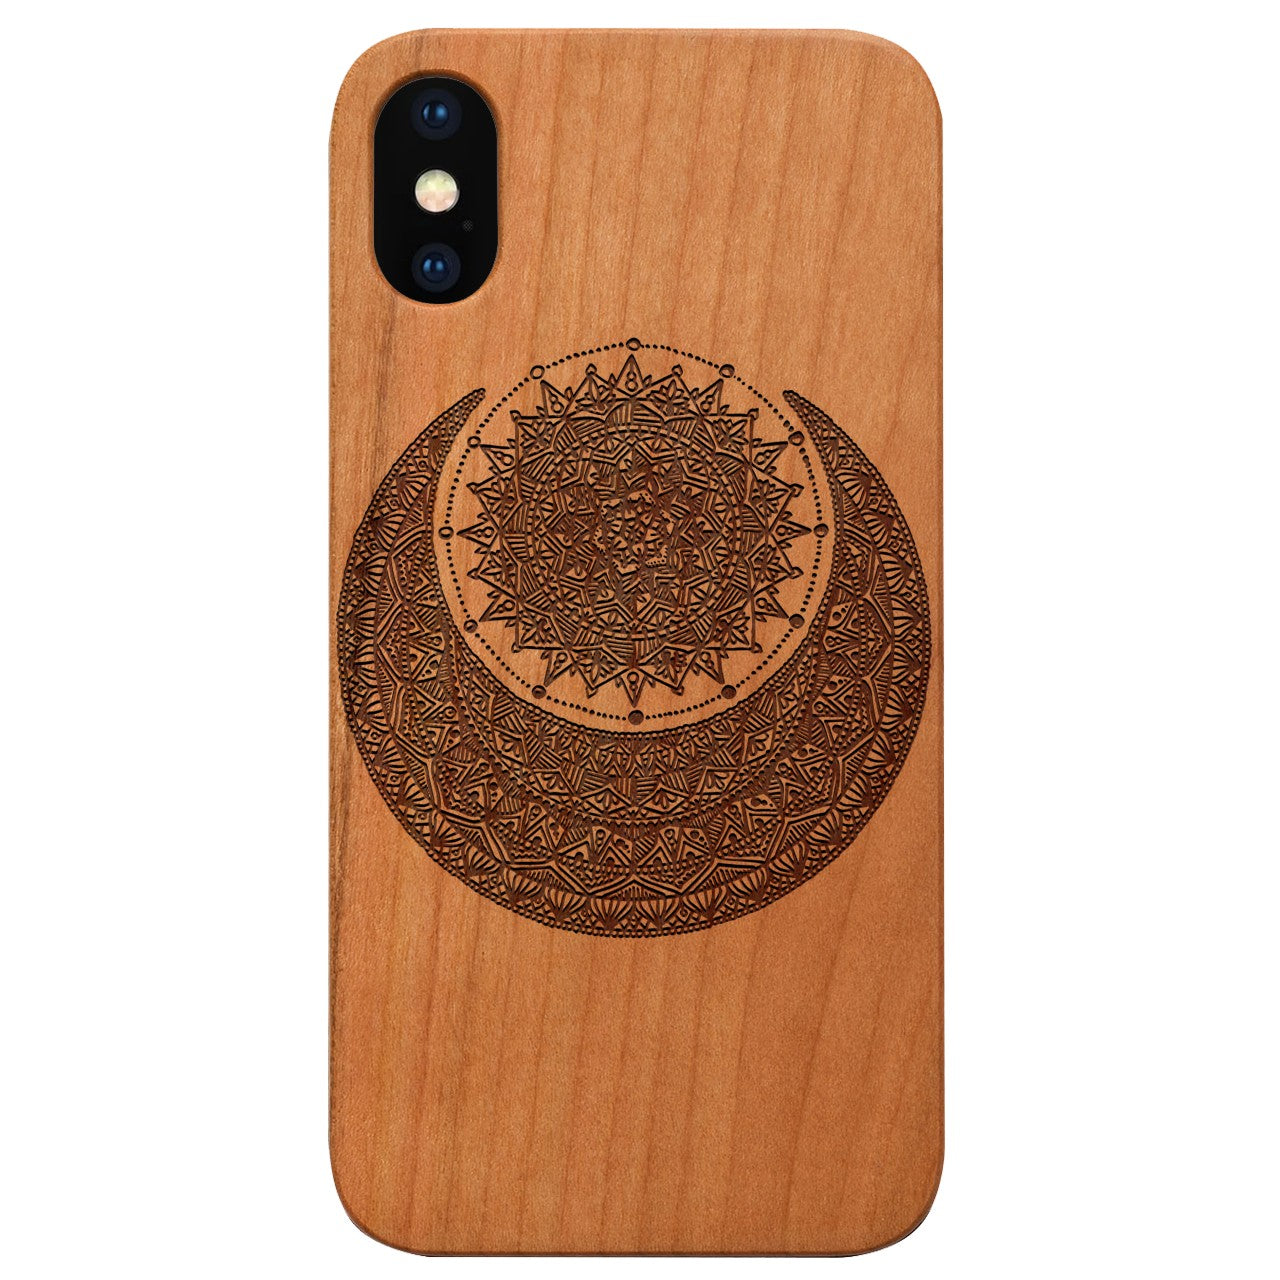  Moon With Sun - Engraved - Wooden Phone Case - IPhone 13 Models